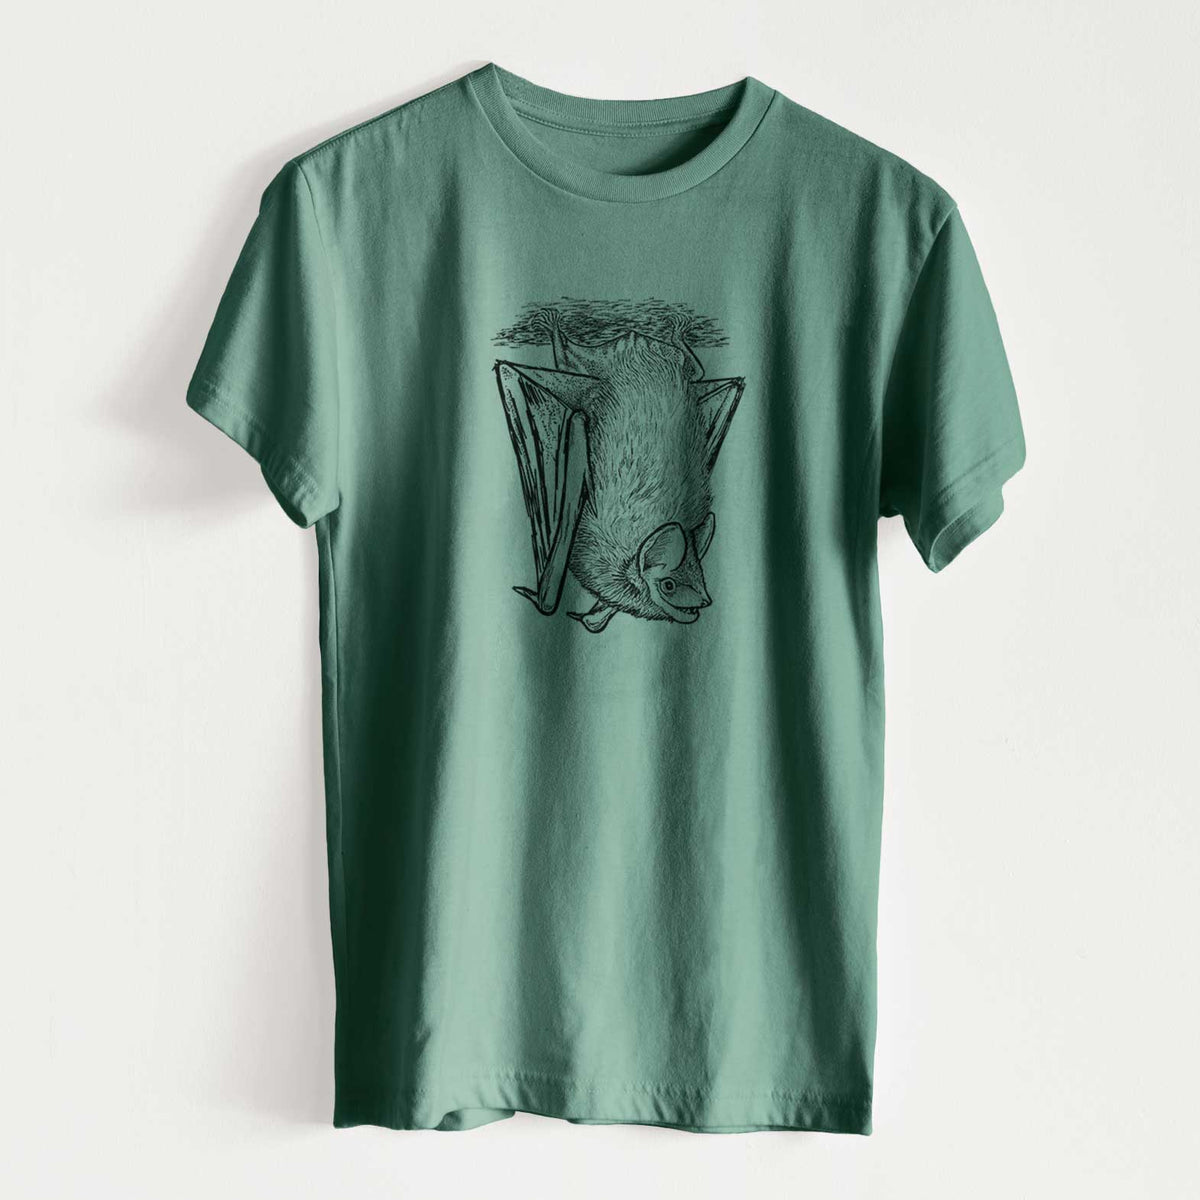 Eptesicus fuscus - Big Brown Bat - Unisex Recycled Eco Tee  - CLOSEOUT - FINAL SALE